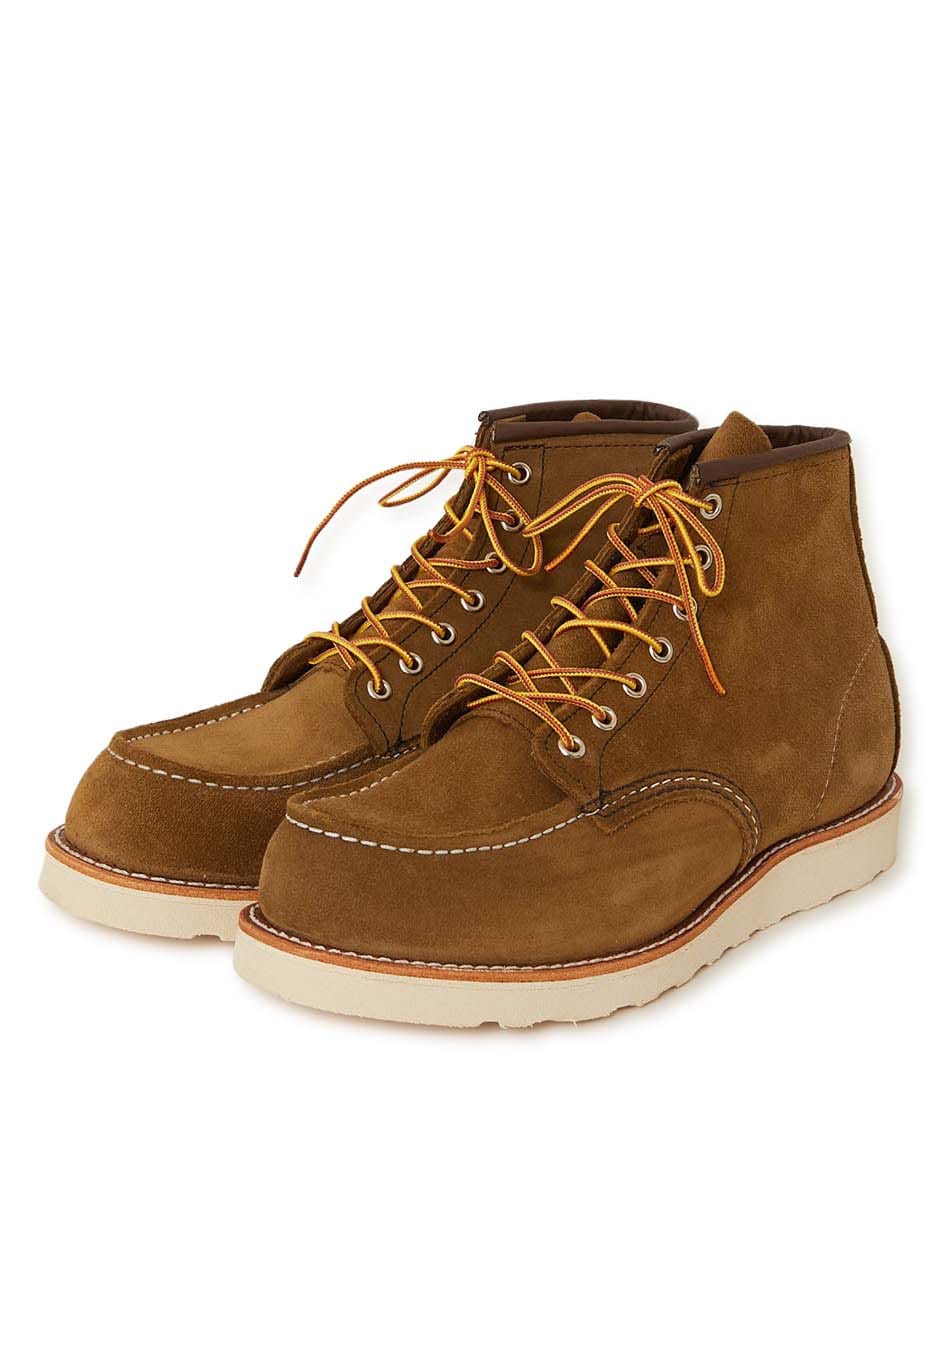 RED WING #8881D 6インチ クラシック モック